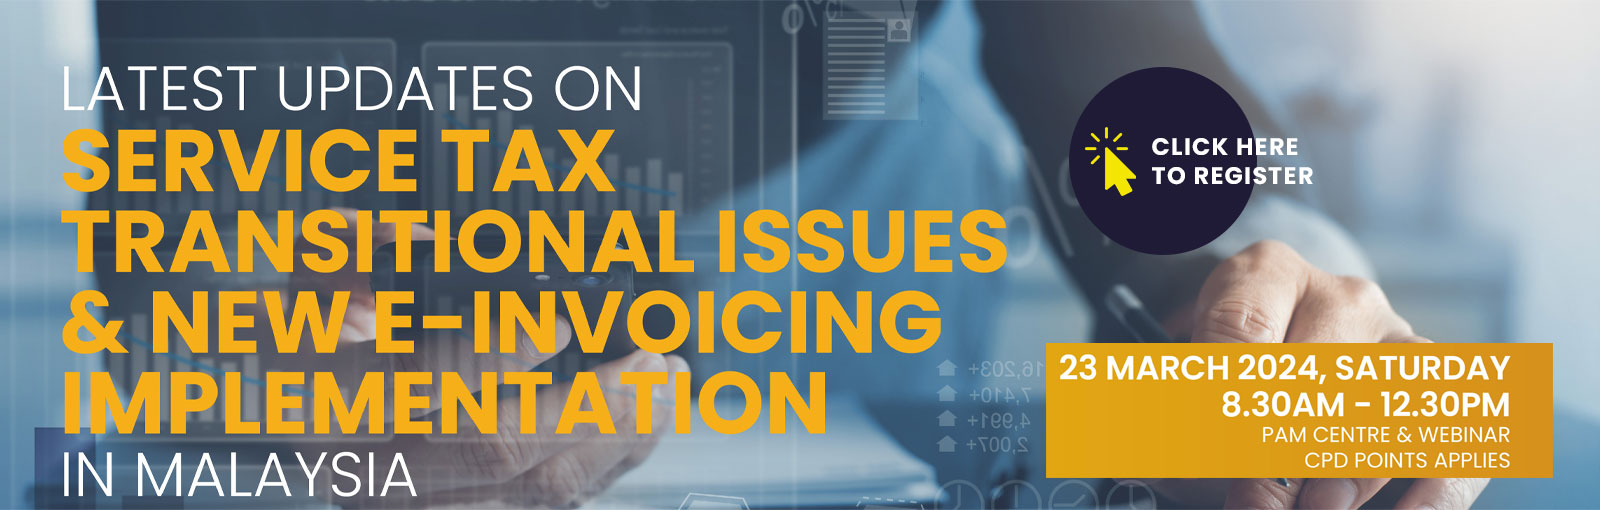 Latest Updates On Service Tax Transitional Issues & New E-invoicing Implementation In Malaysia